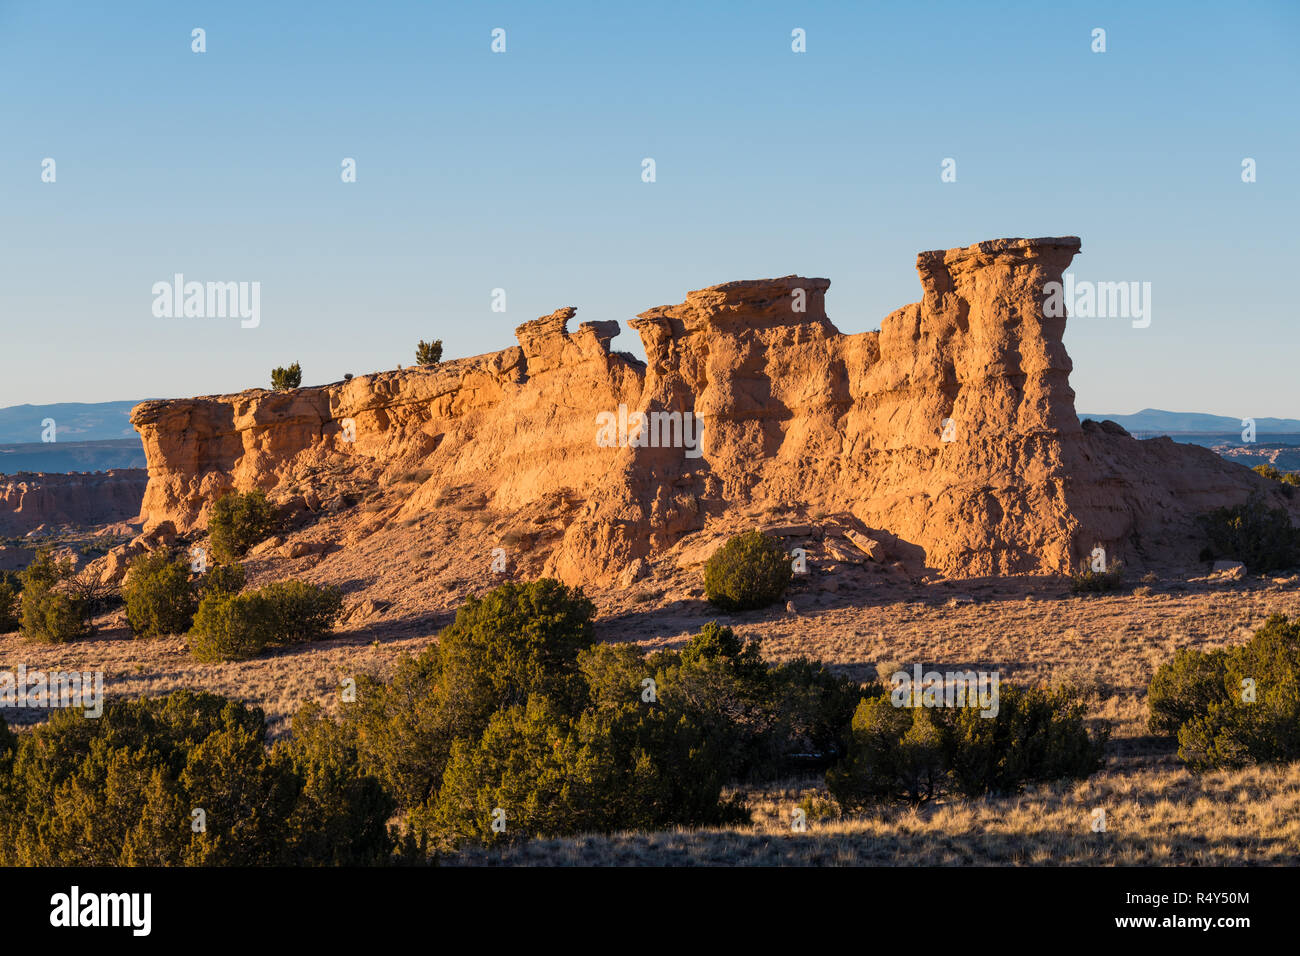 Red rock formation glowing in the golden light of sunset  near Santa Fe, New Mexico Stock Photo